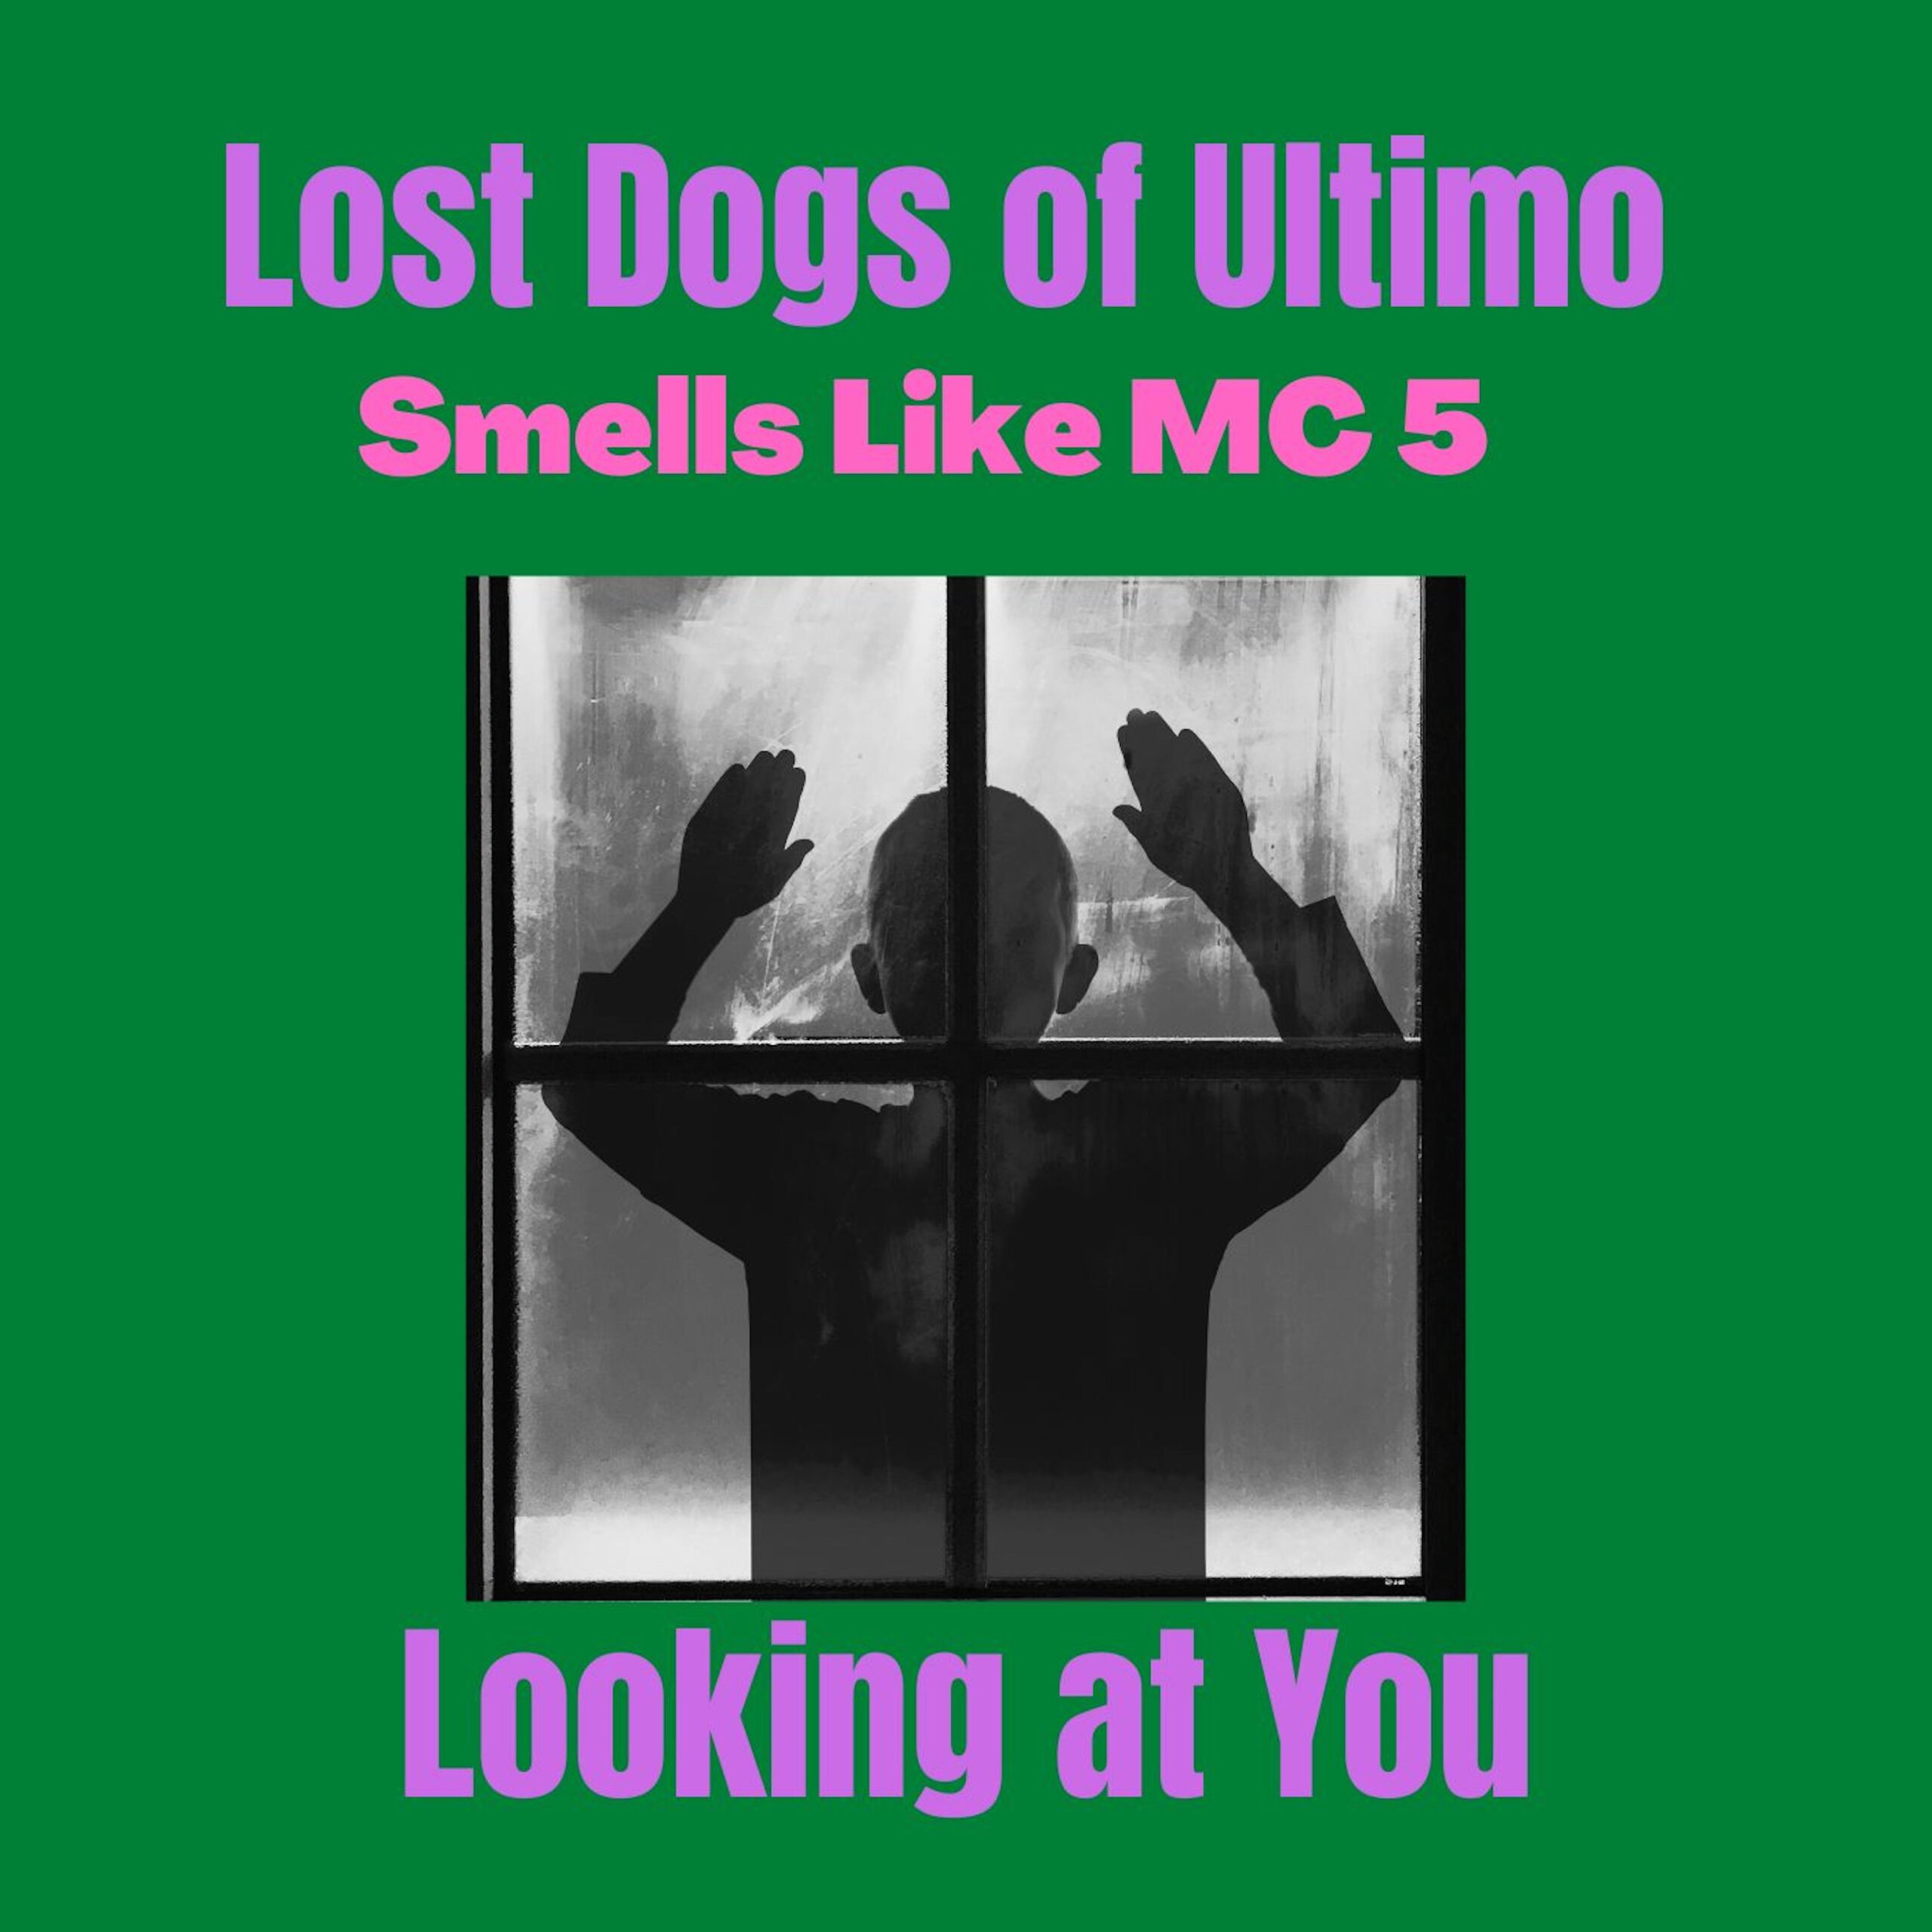 The Lost Dogs of Ultimo